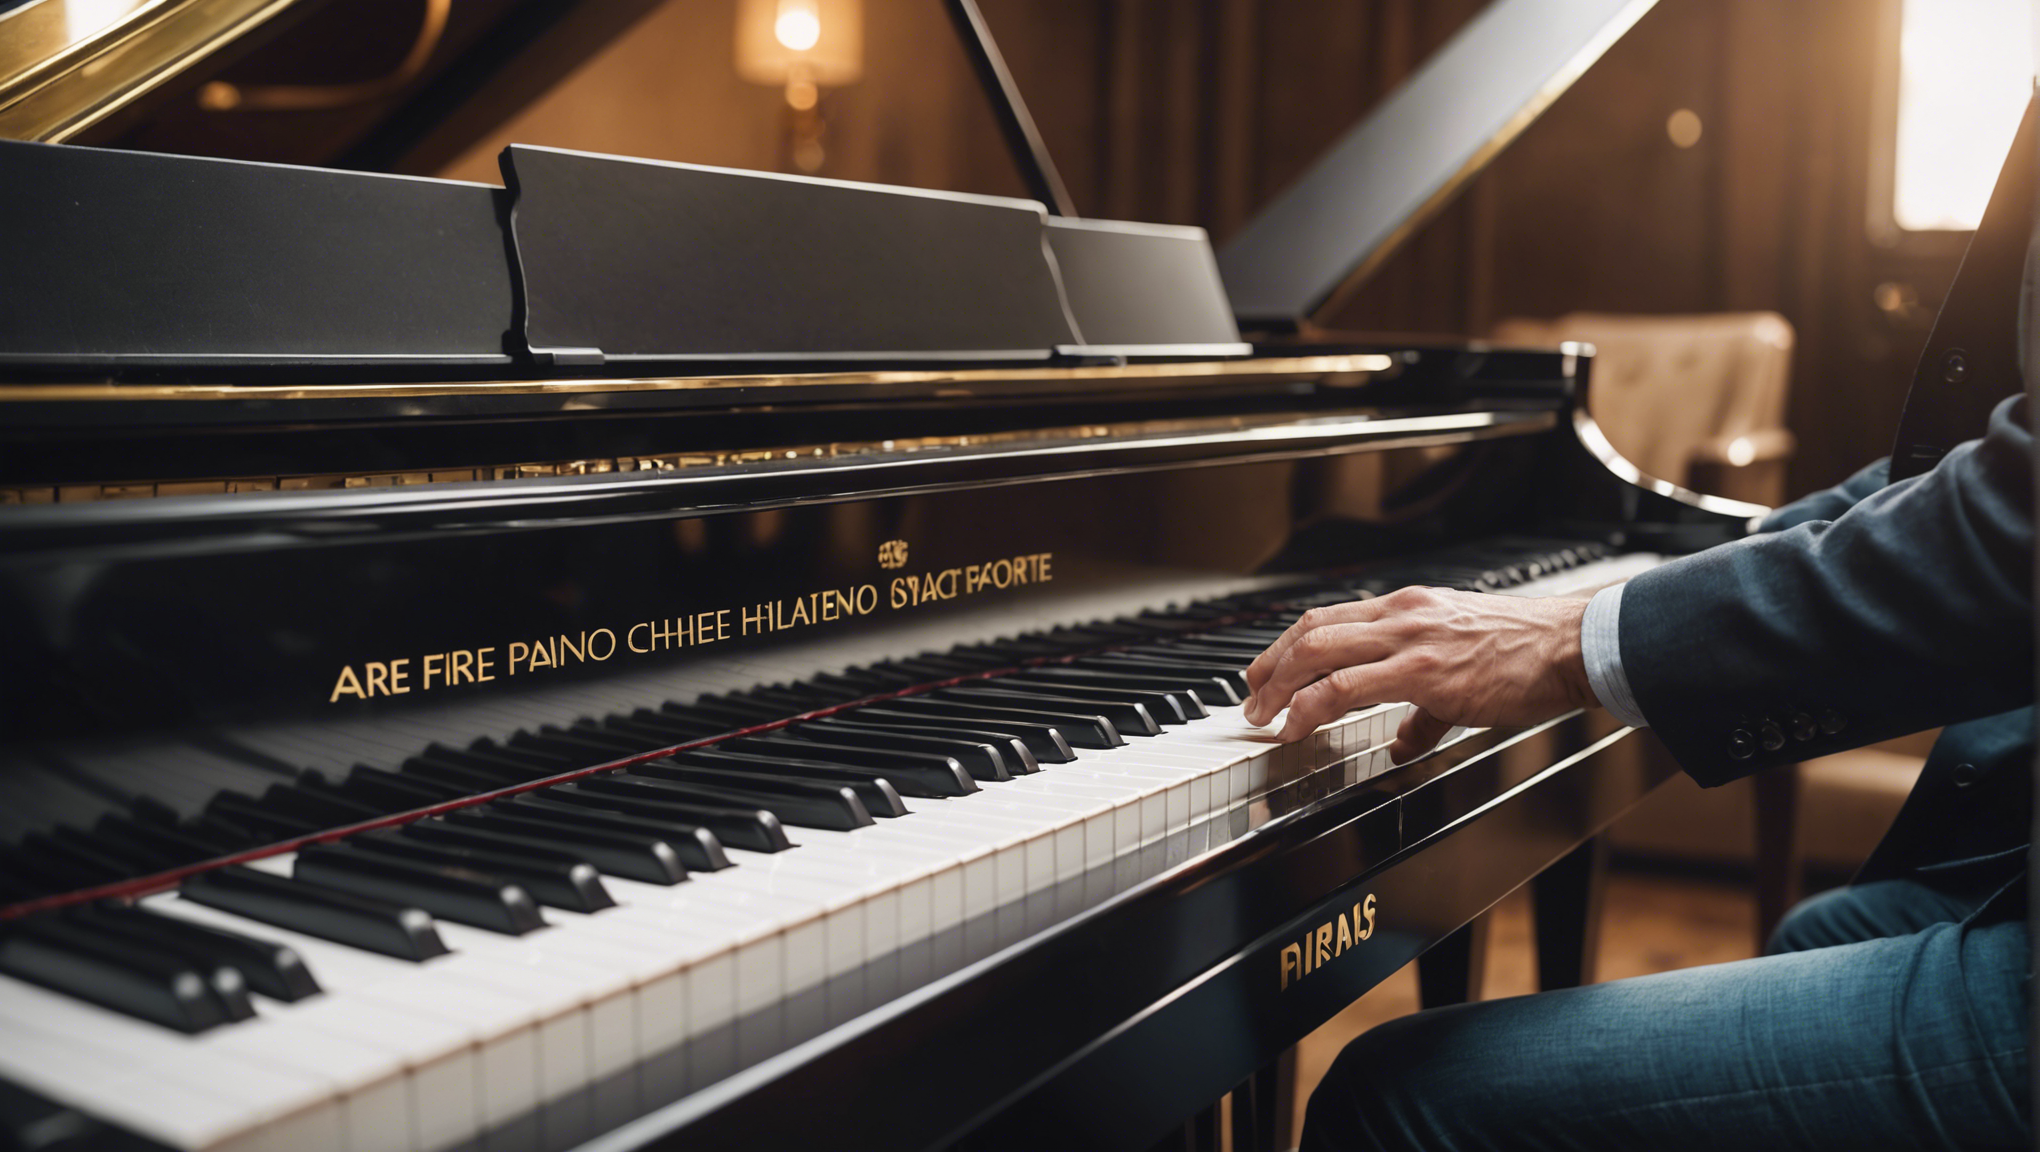 discover why free piano offers could be the new favorite tool for fraud campaigns in this compelling article.